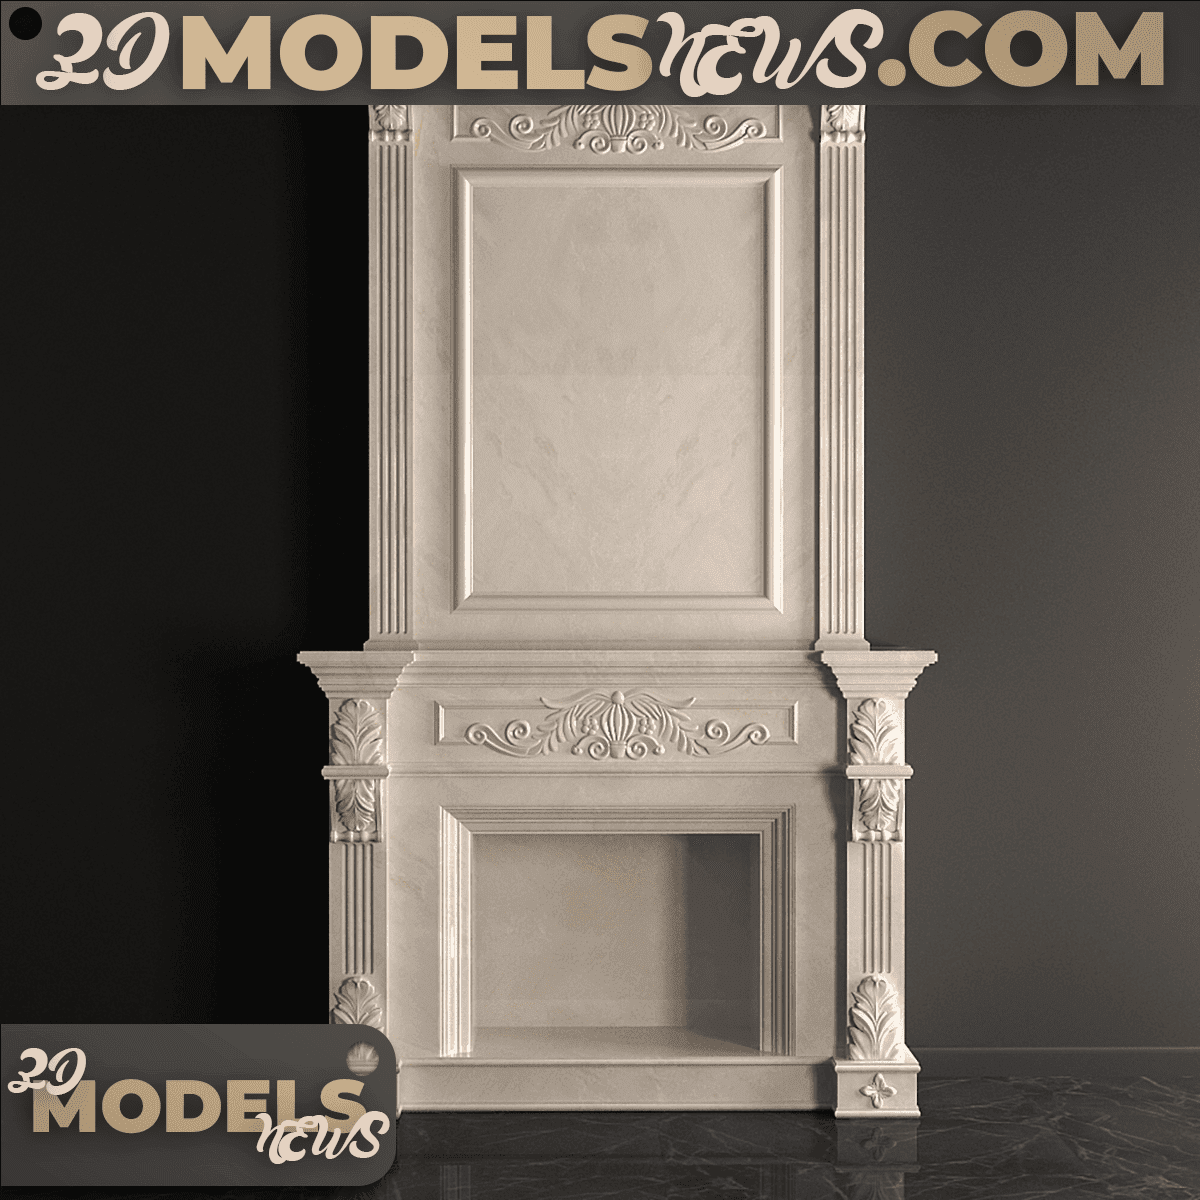 Classic and modern style marble fireplace model 2